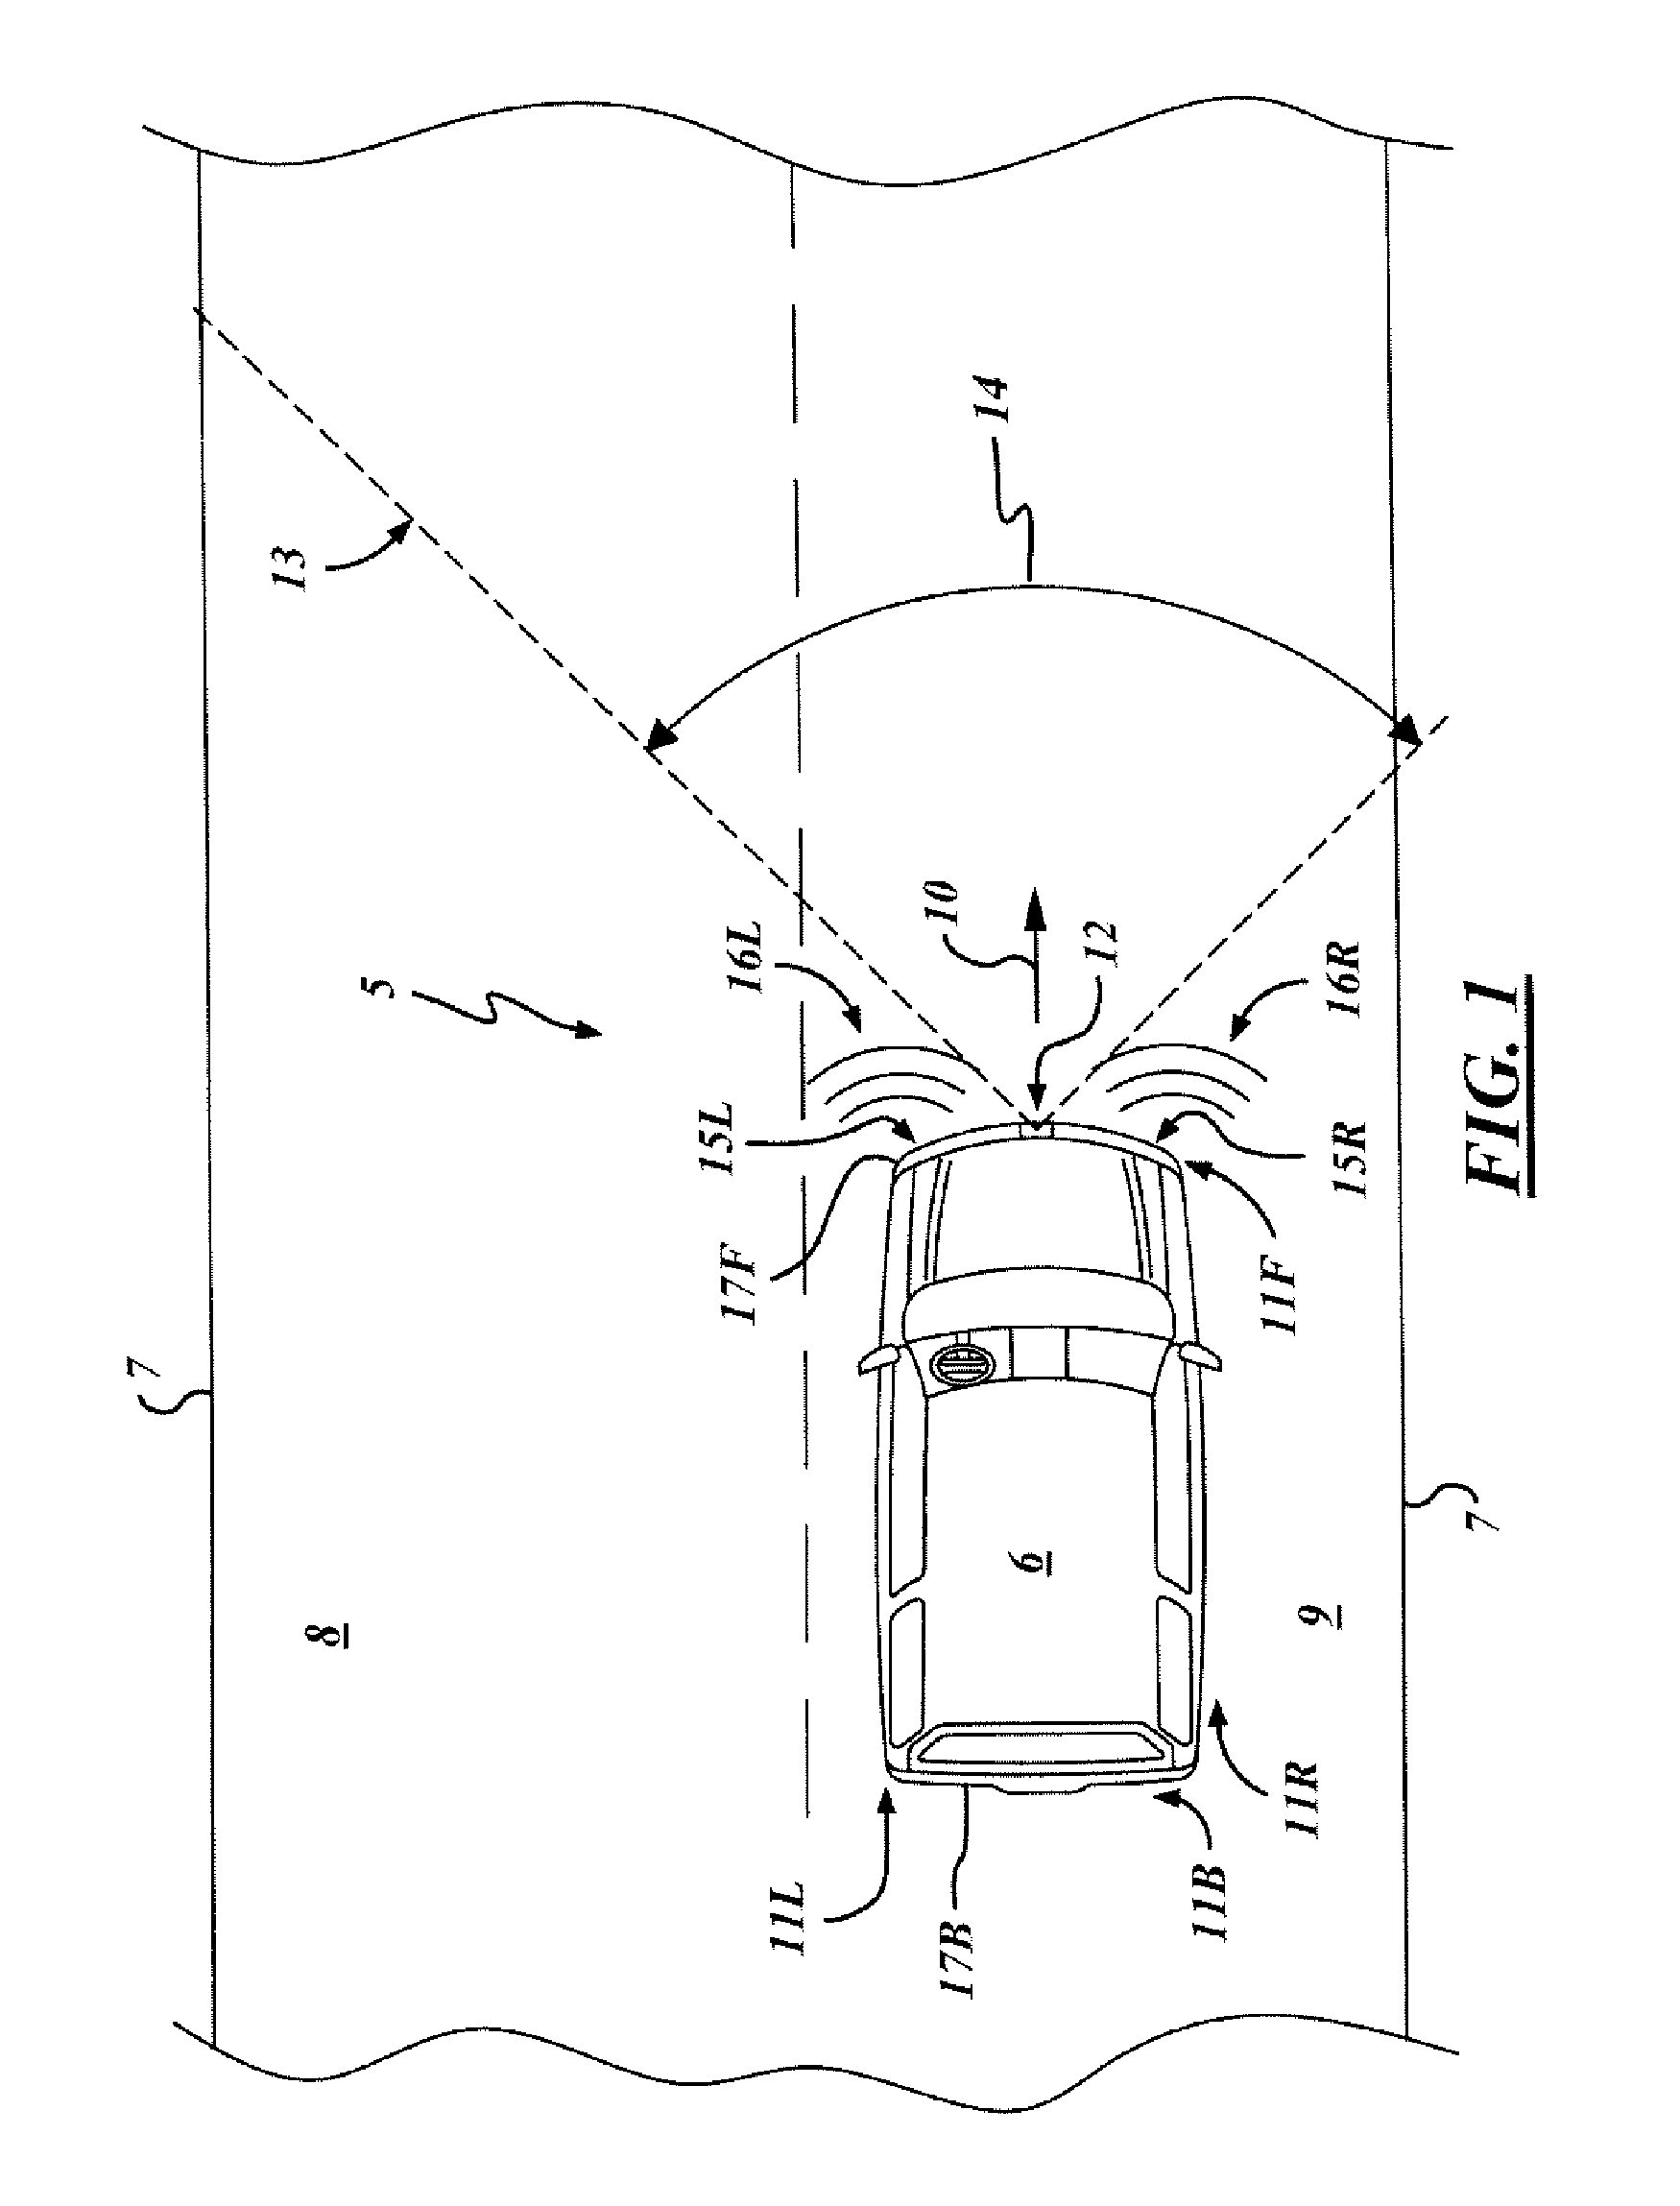 System and method for preemptively sensing an object and selectively operating both a collision countermeasure system and a parking assistance system aboard an automotive vehicle